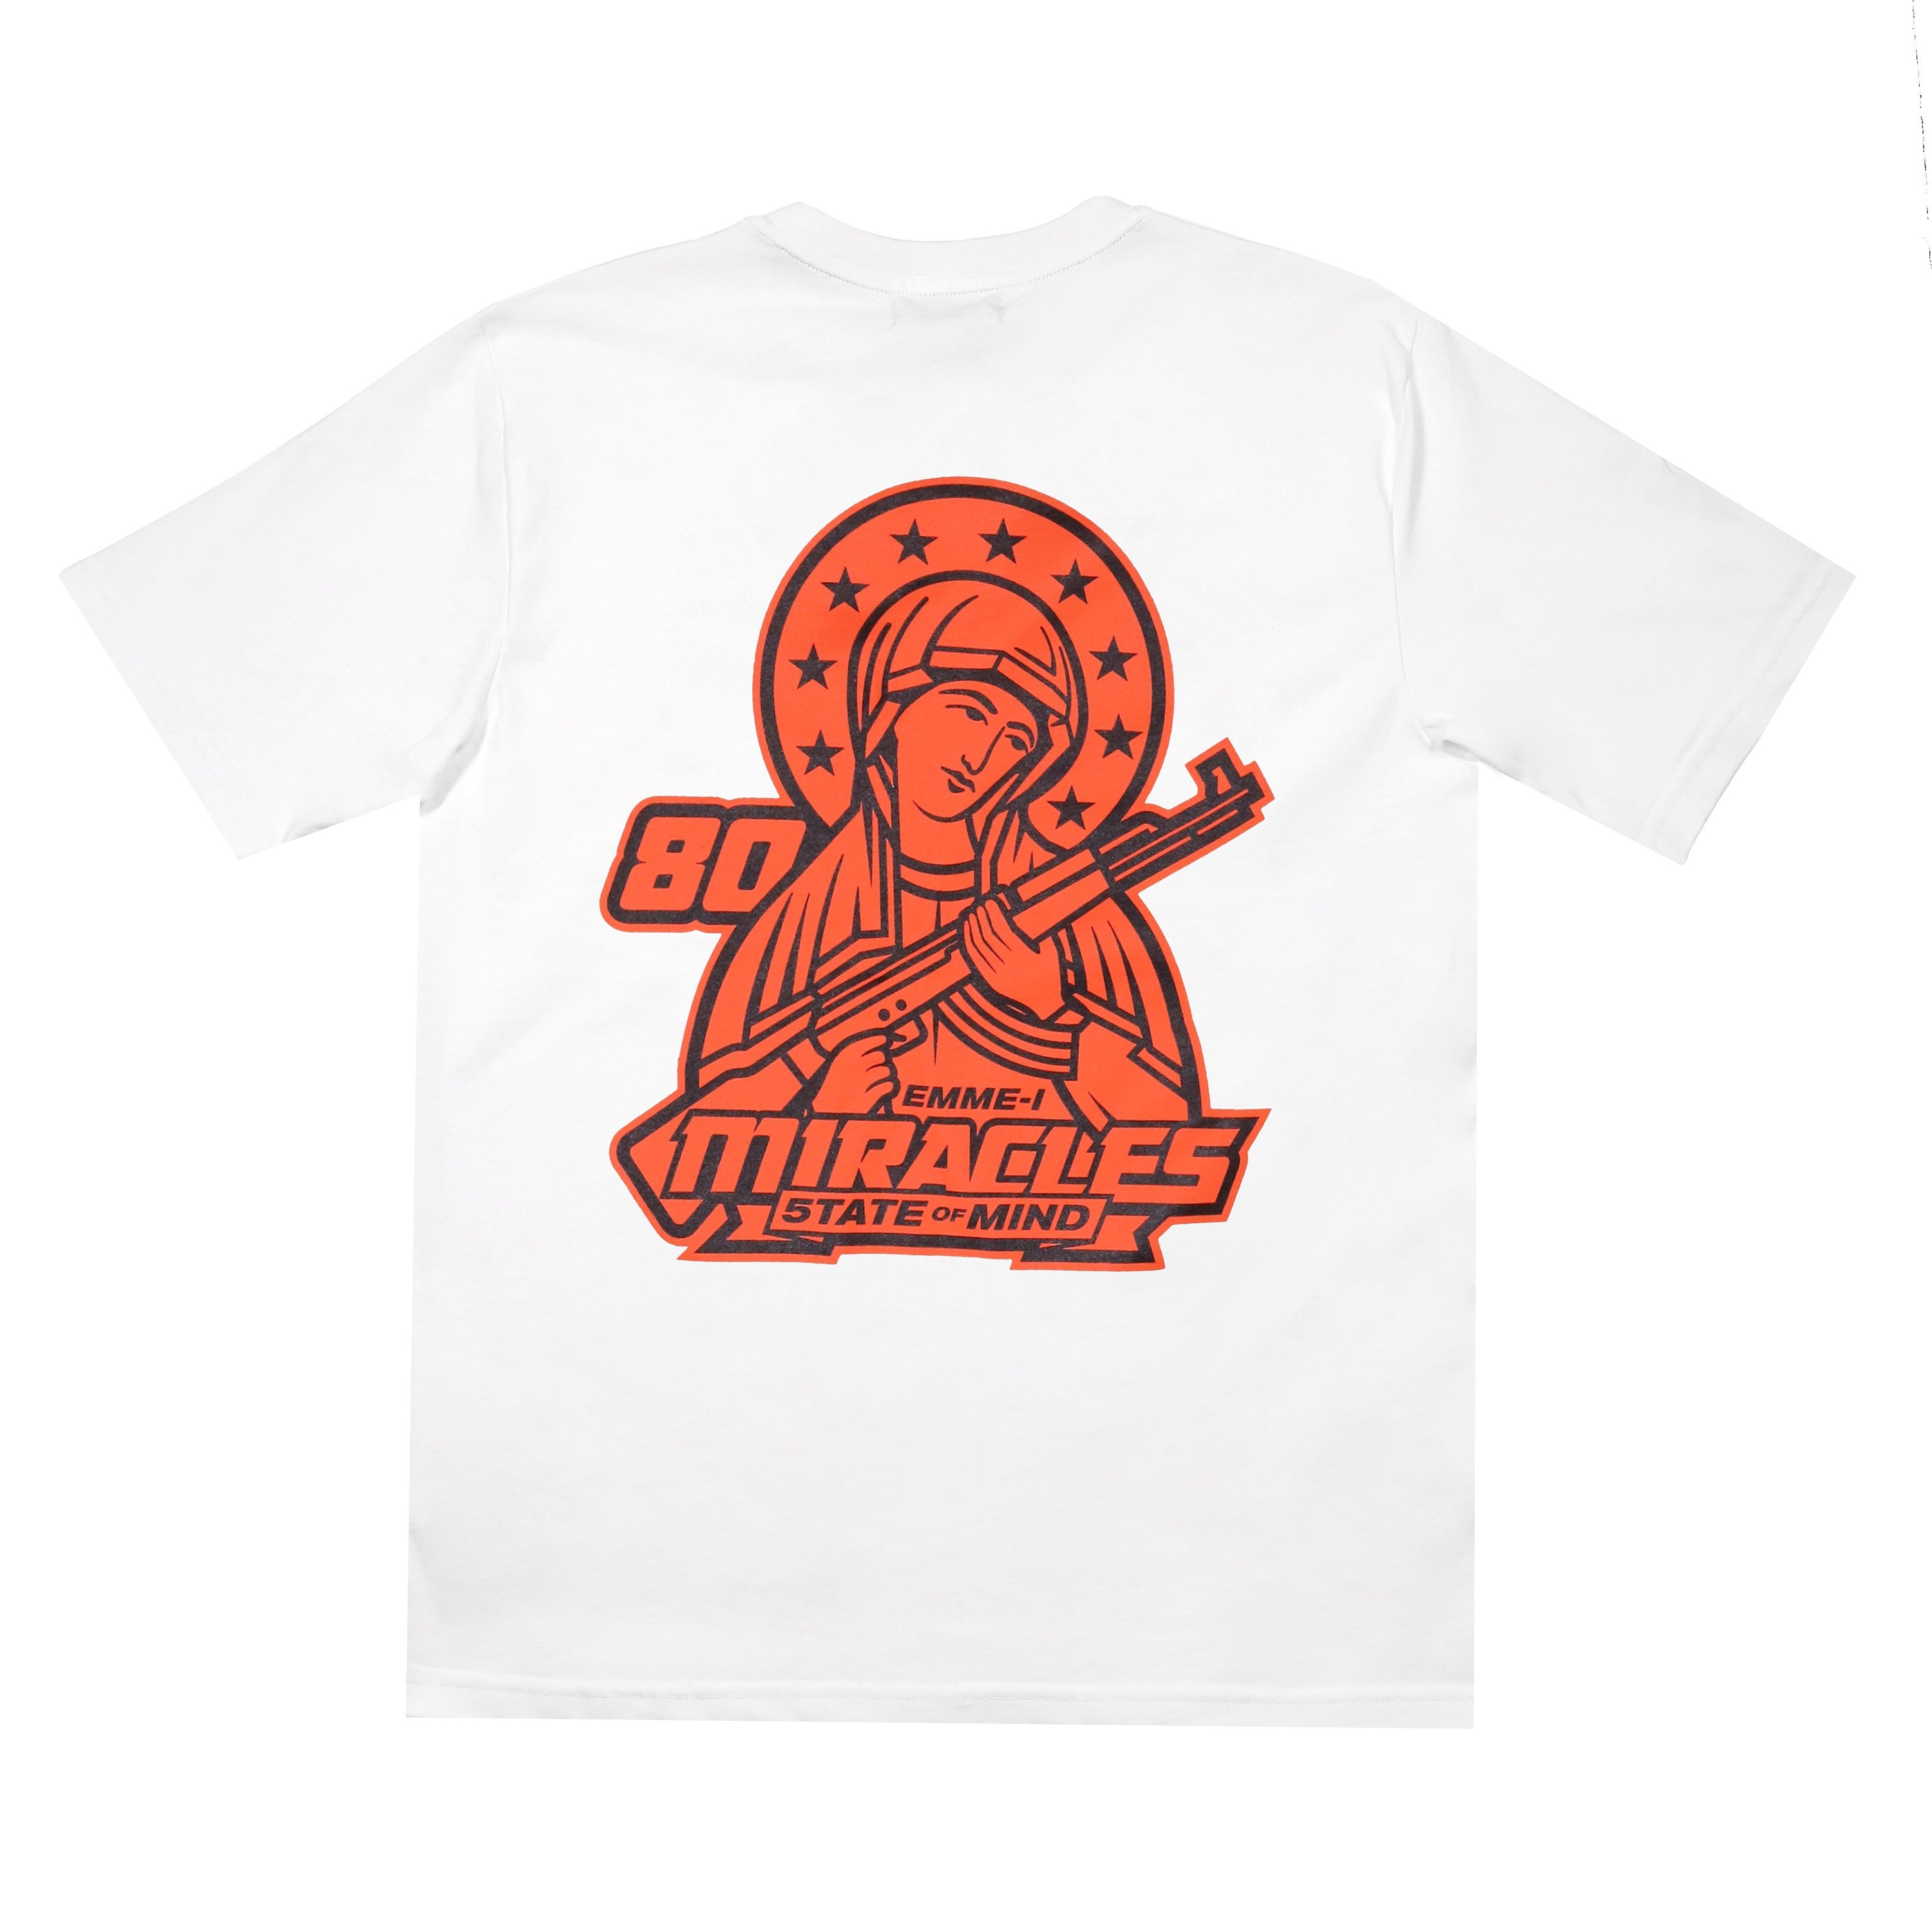 Emme-i Miracles Tee X Gue' White Men's T-Shirt